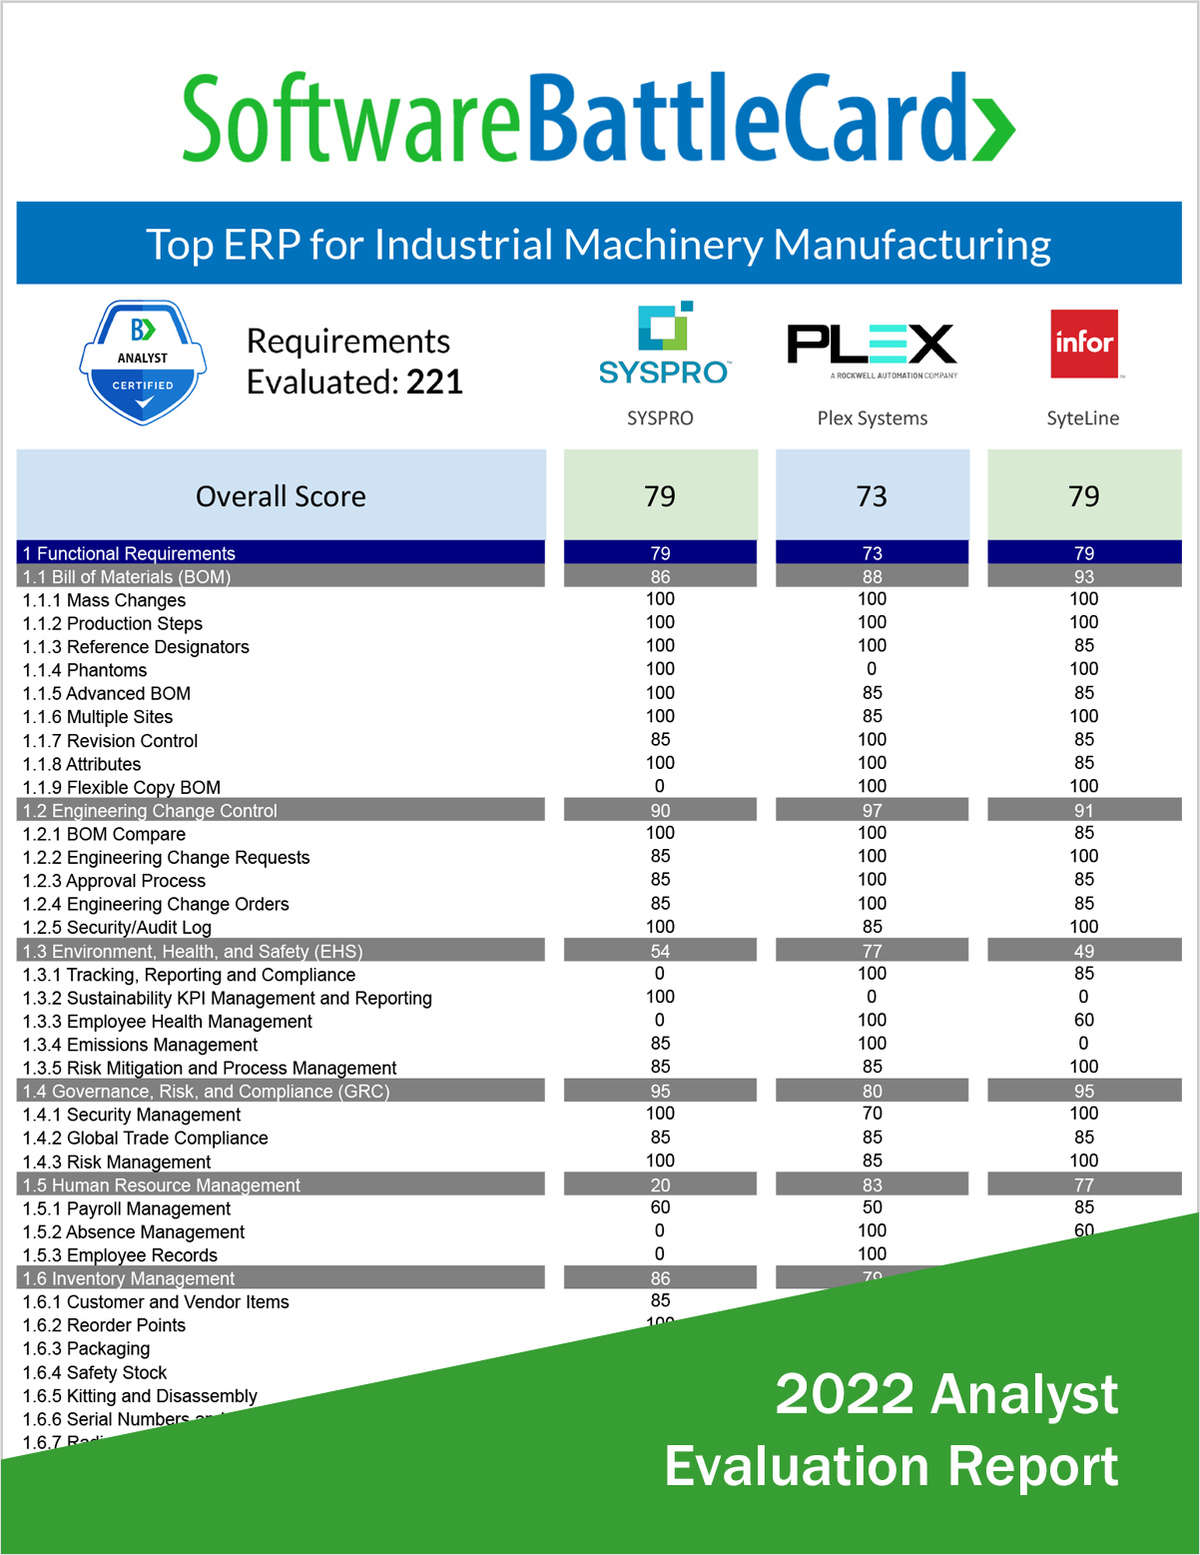 Top ERP for Industrial Machinery Manufacturing--SYSPRO vs. Plex Systems vs. Infor SyteLine